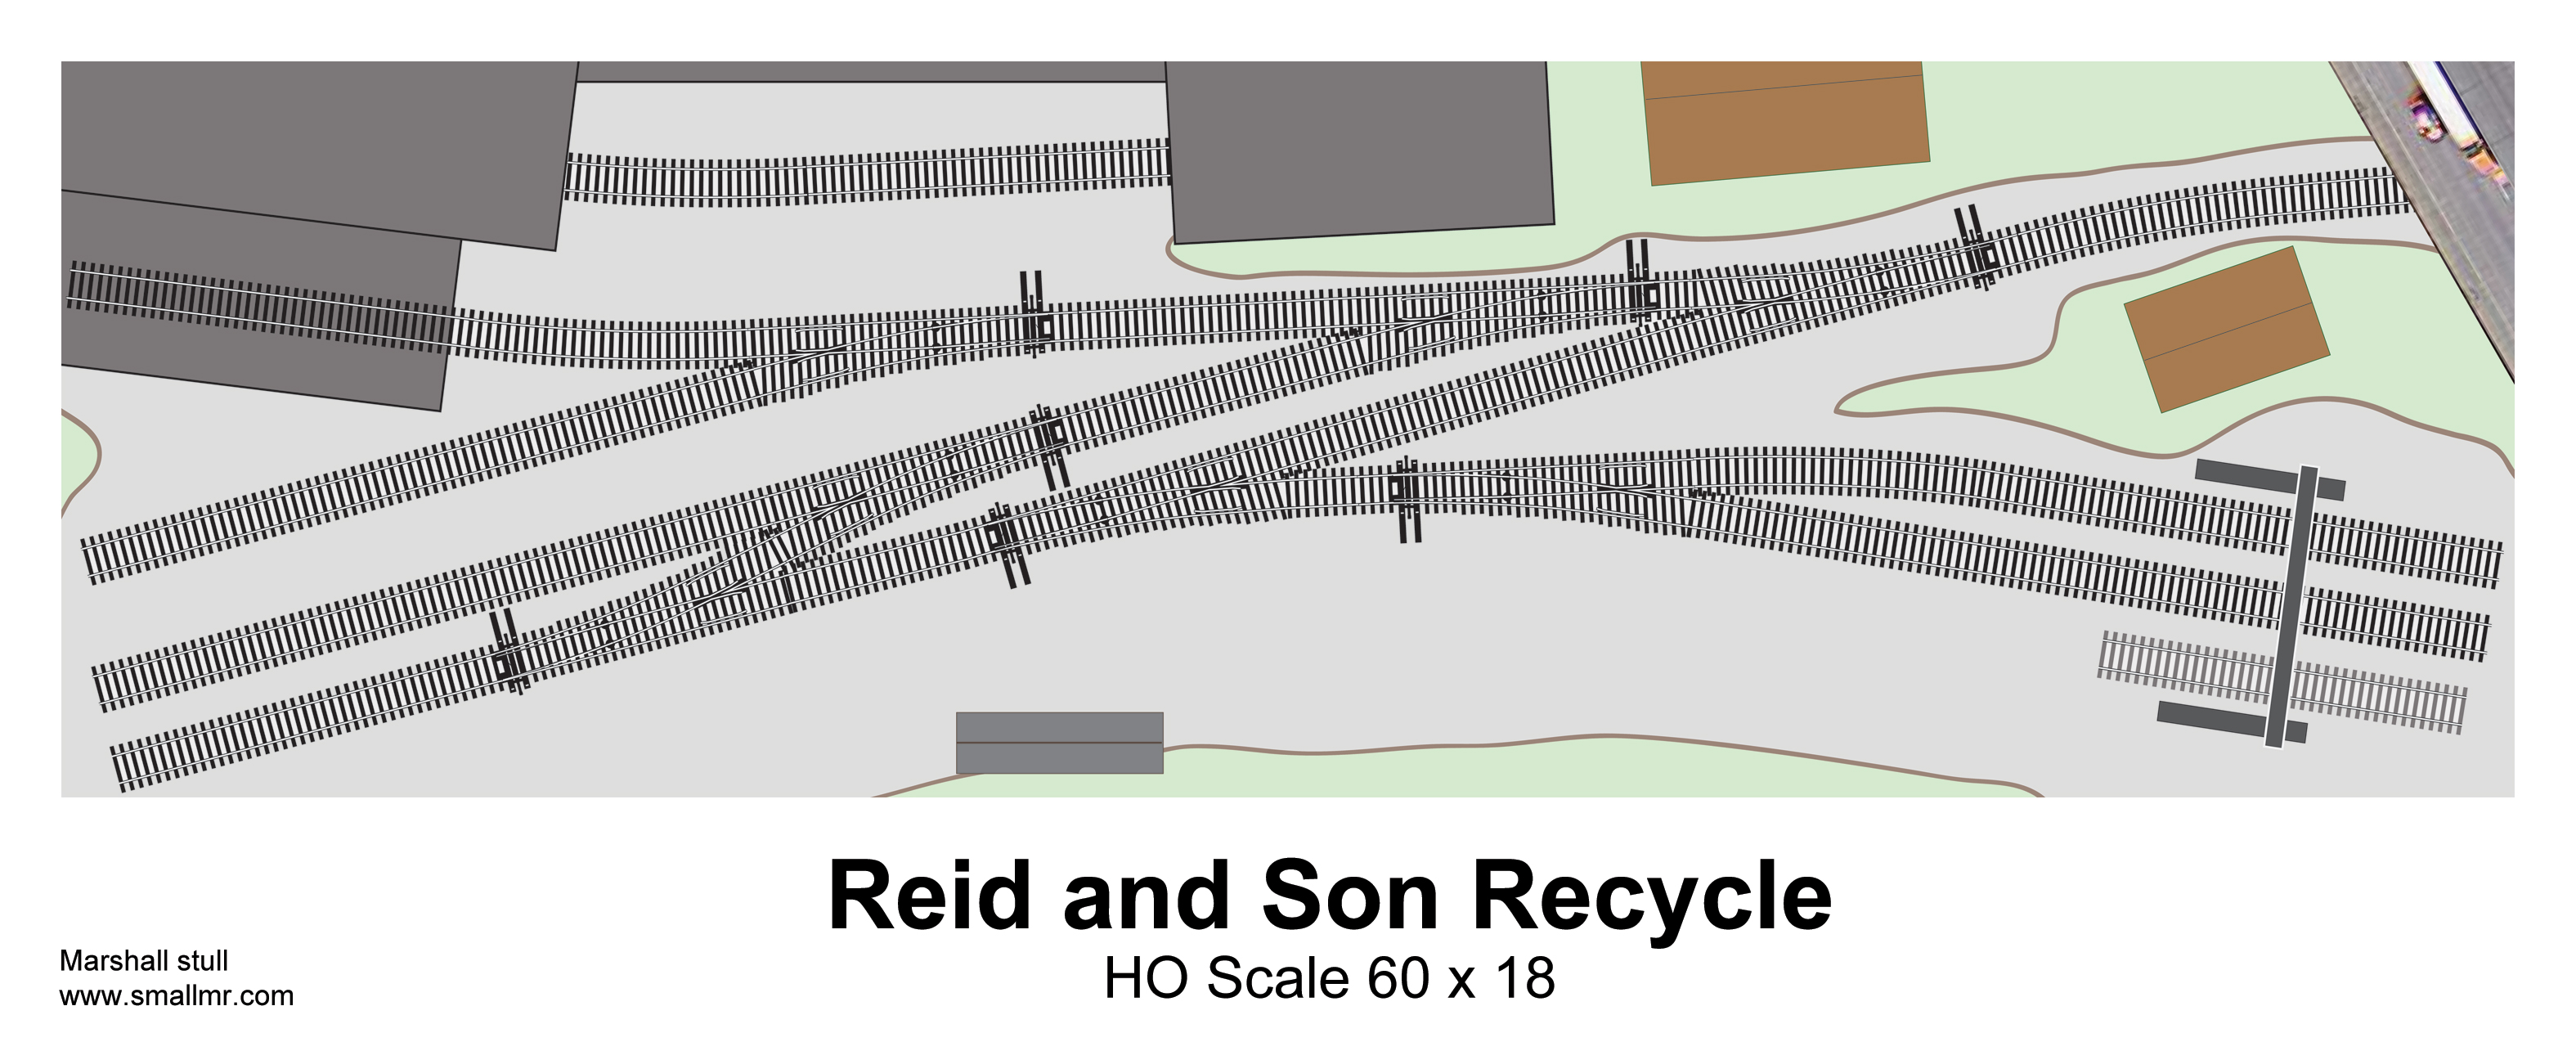 Reid and Son Recycle